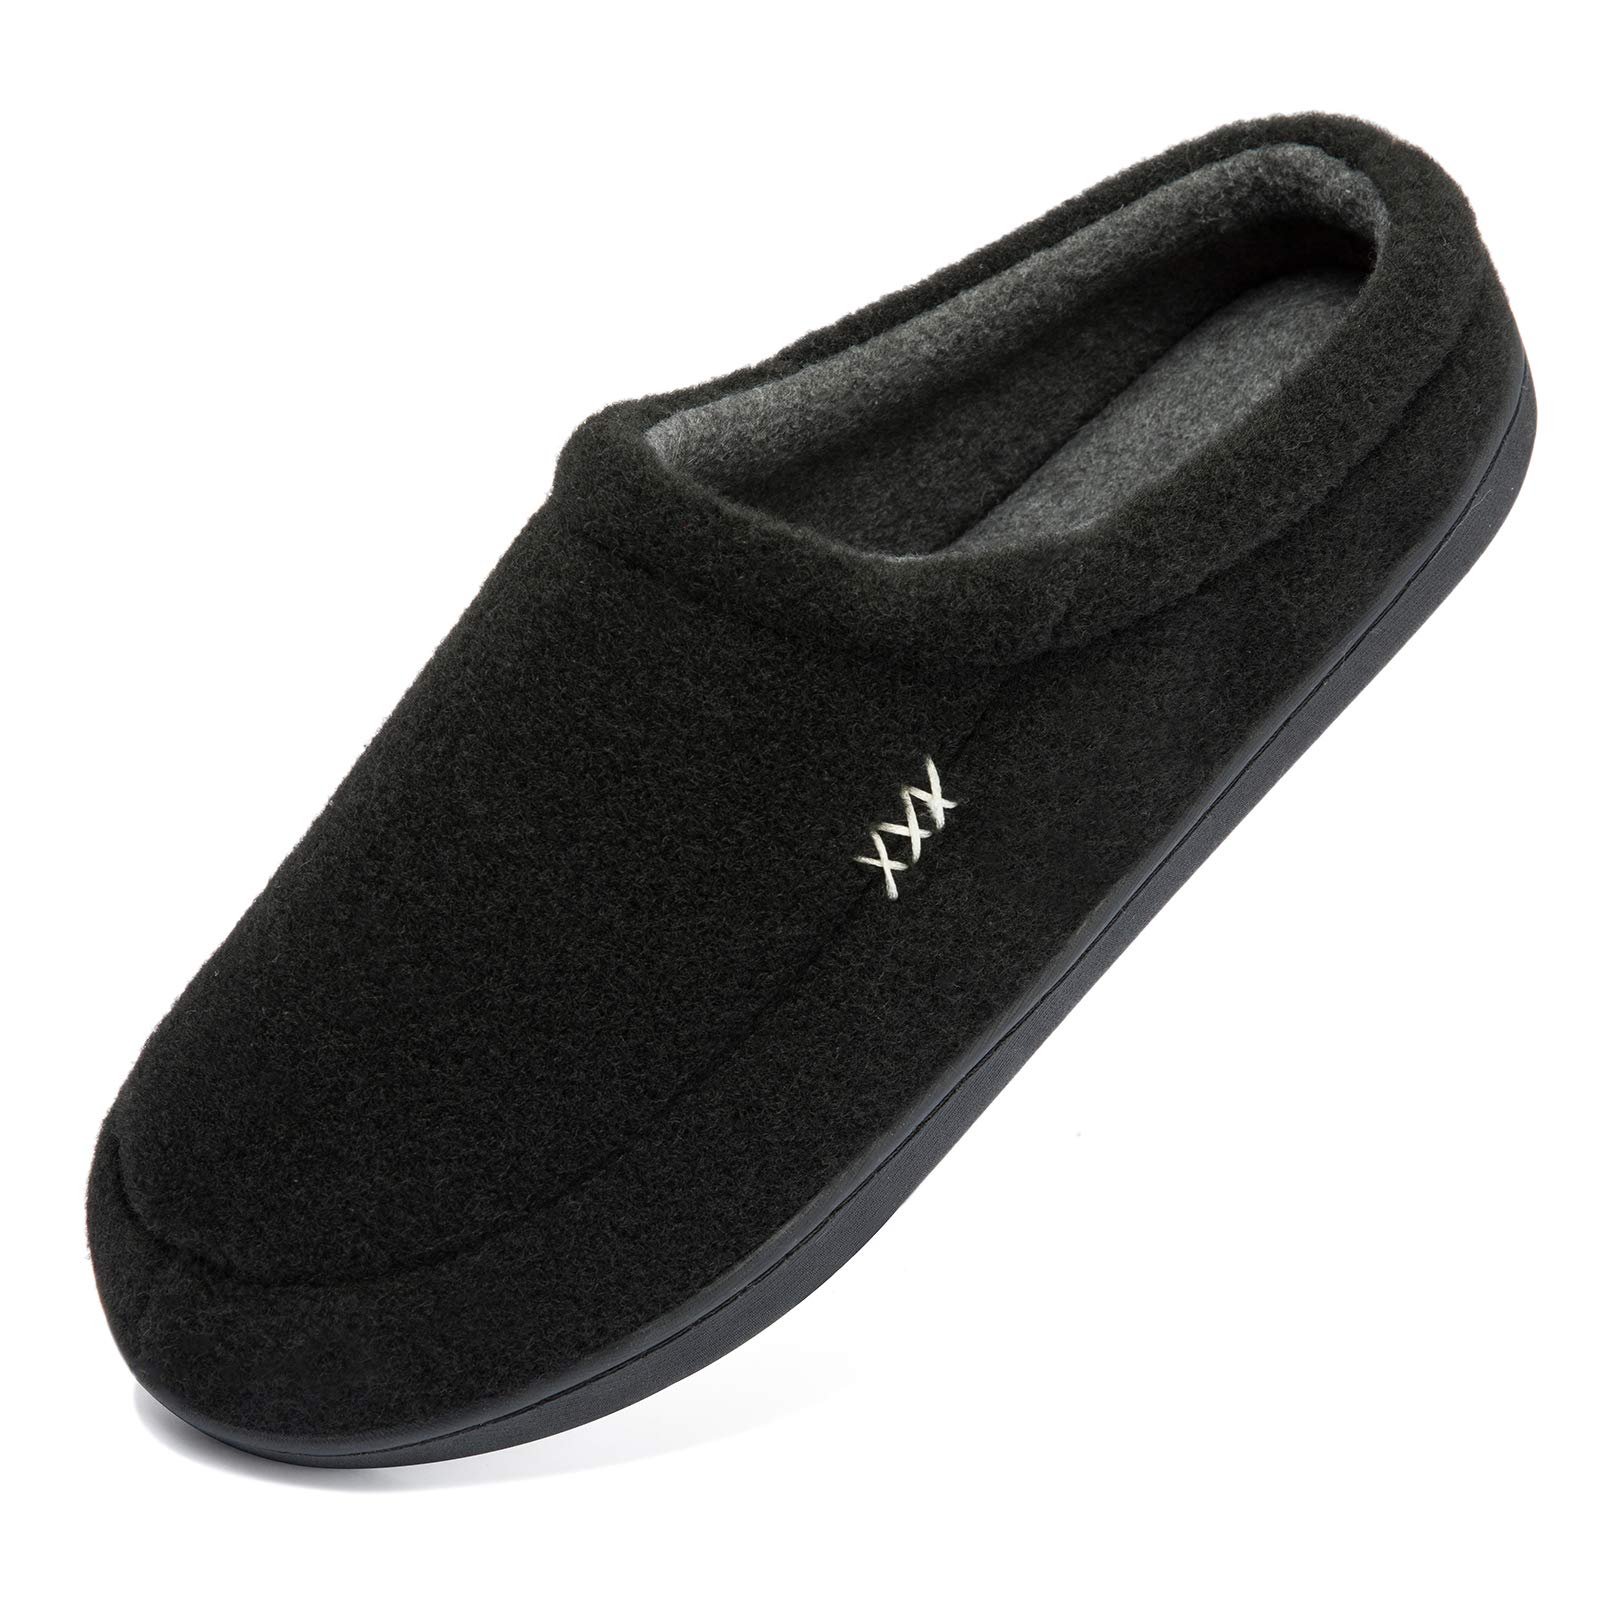 Newdenber Mens Woolen Fabric Memory Foam Slippers Comfort Breathable Slip On Indoor Outdoor Clog Black House Shoes, Size 8-85